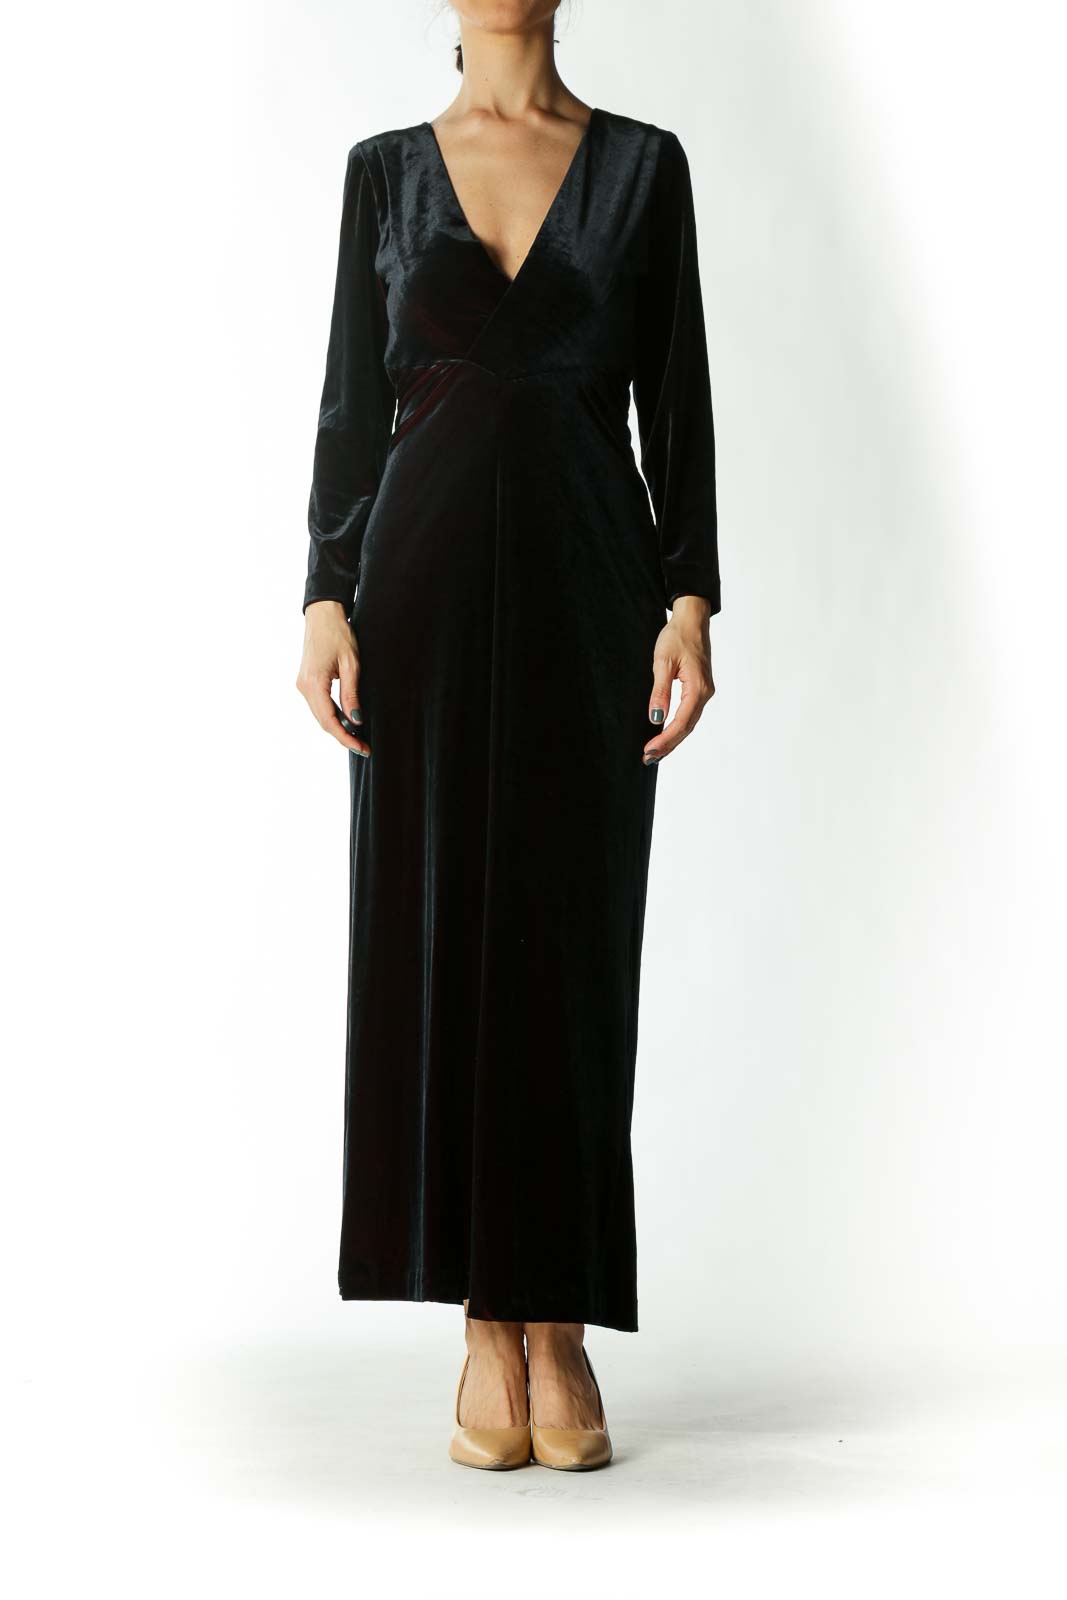 Black and Burgundy Evening Dress  Front